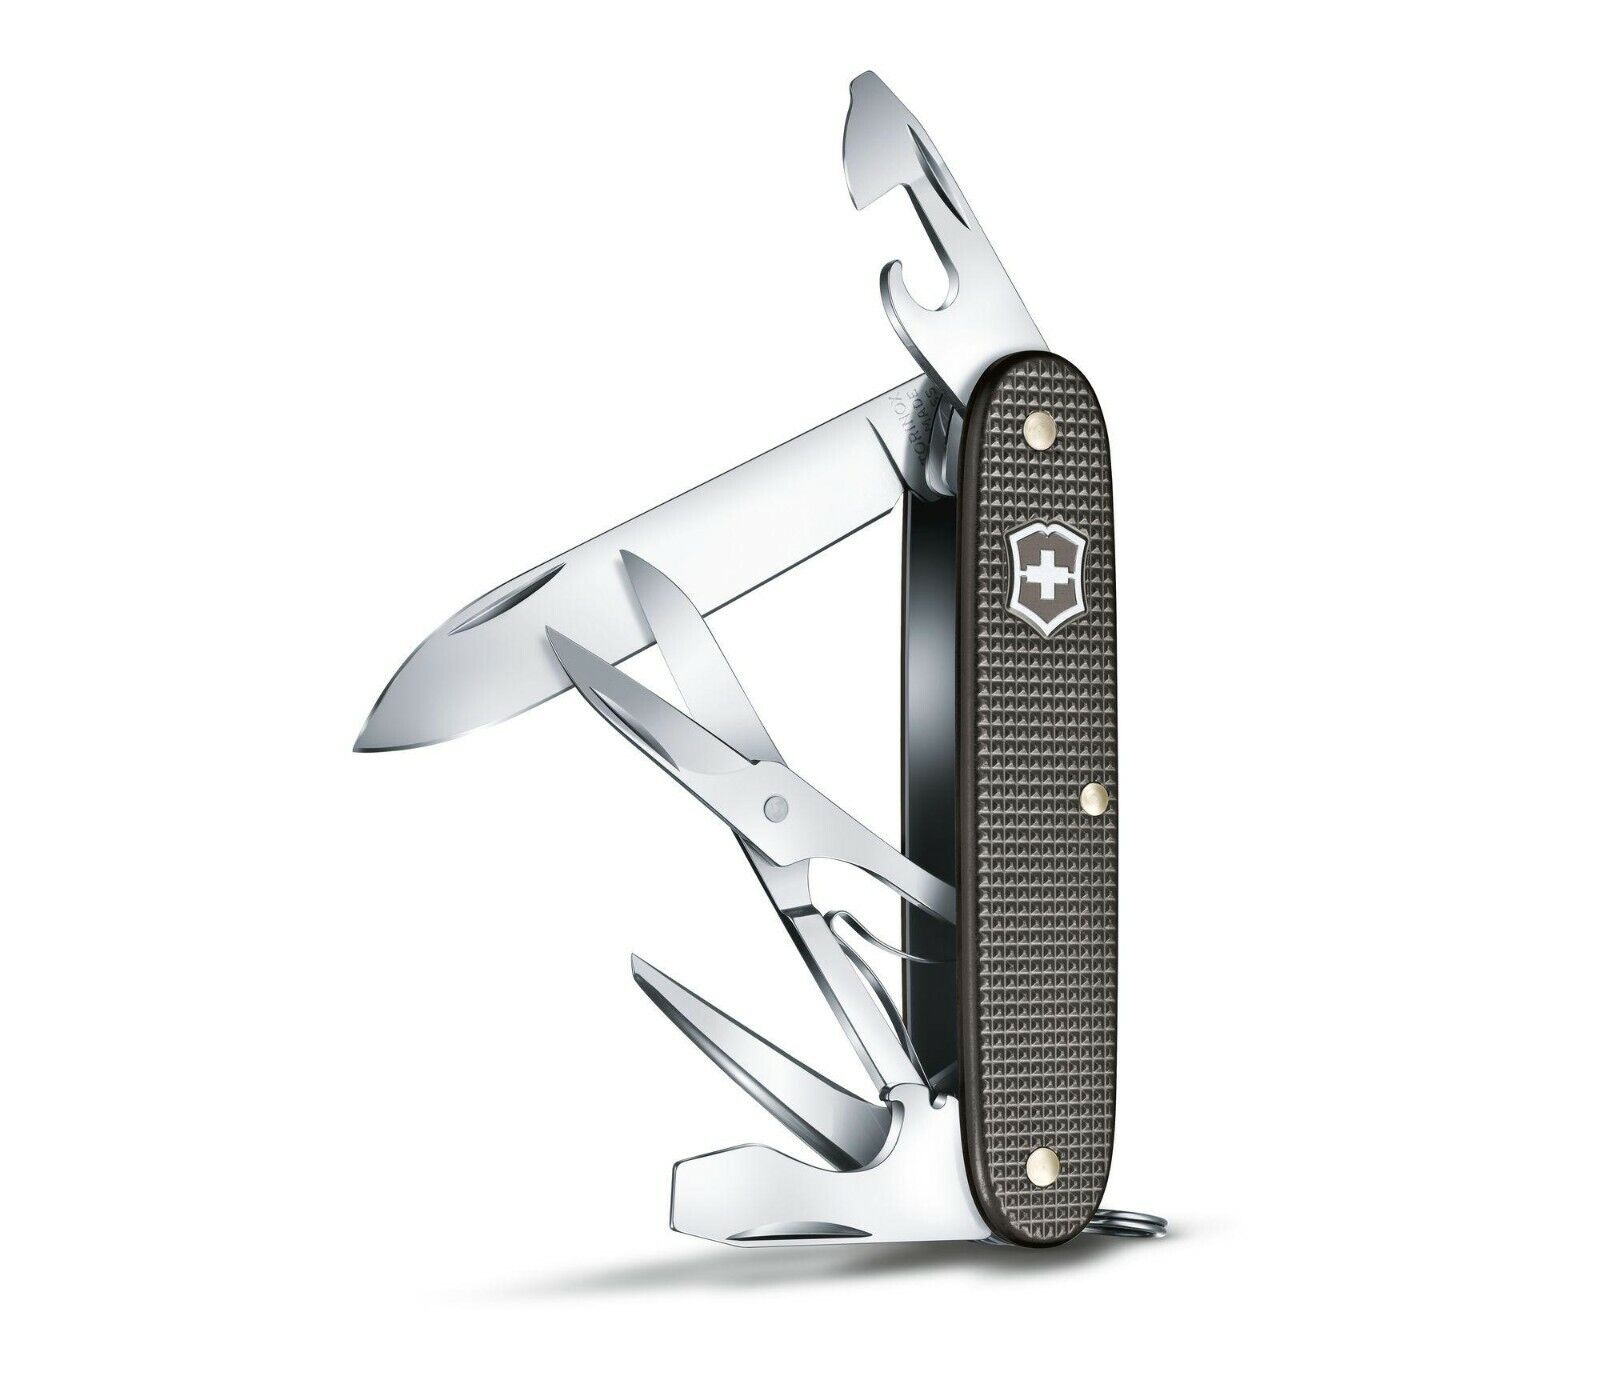 Victorinox Pioneer X Alox Limited Edition 2022 Thunder Gray Scales 0.8231.L22 